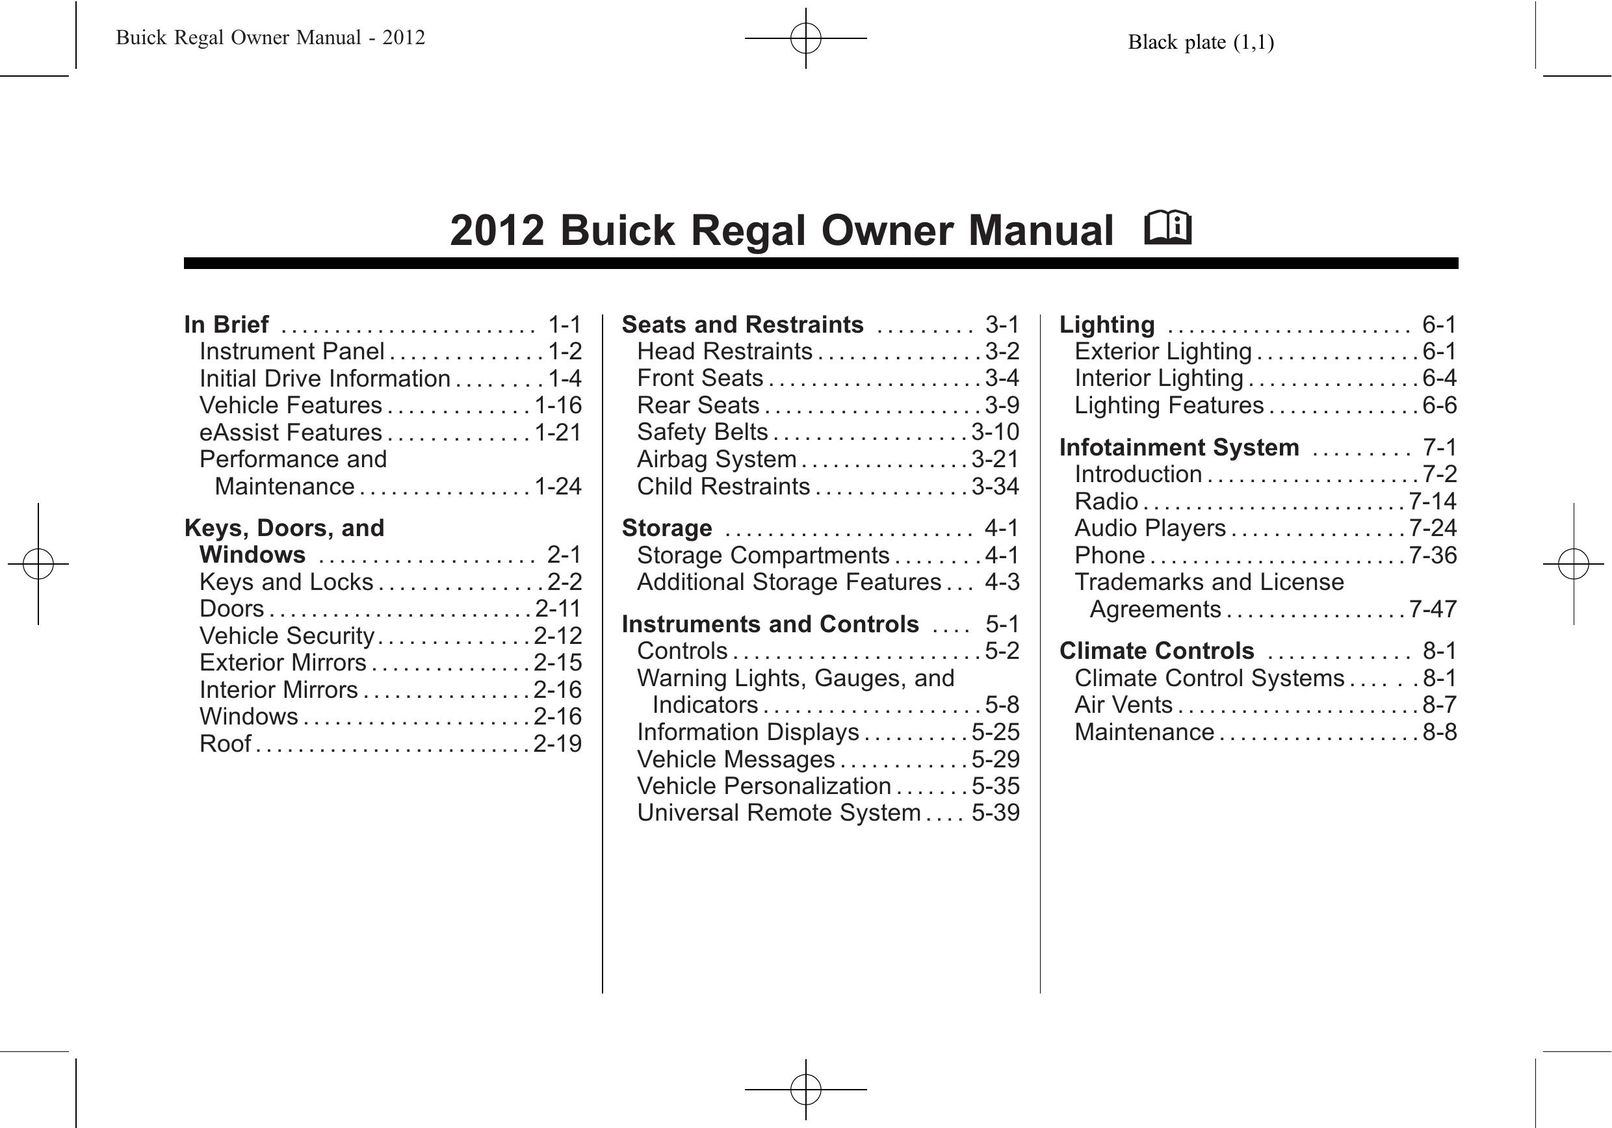 Buick 2012 Model Vehicle User Manual (Page 1)